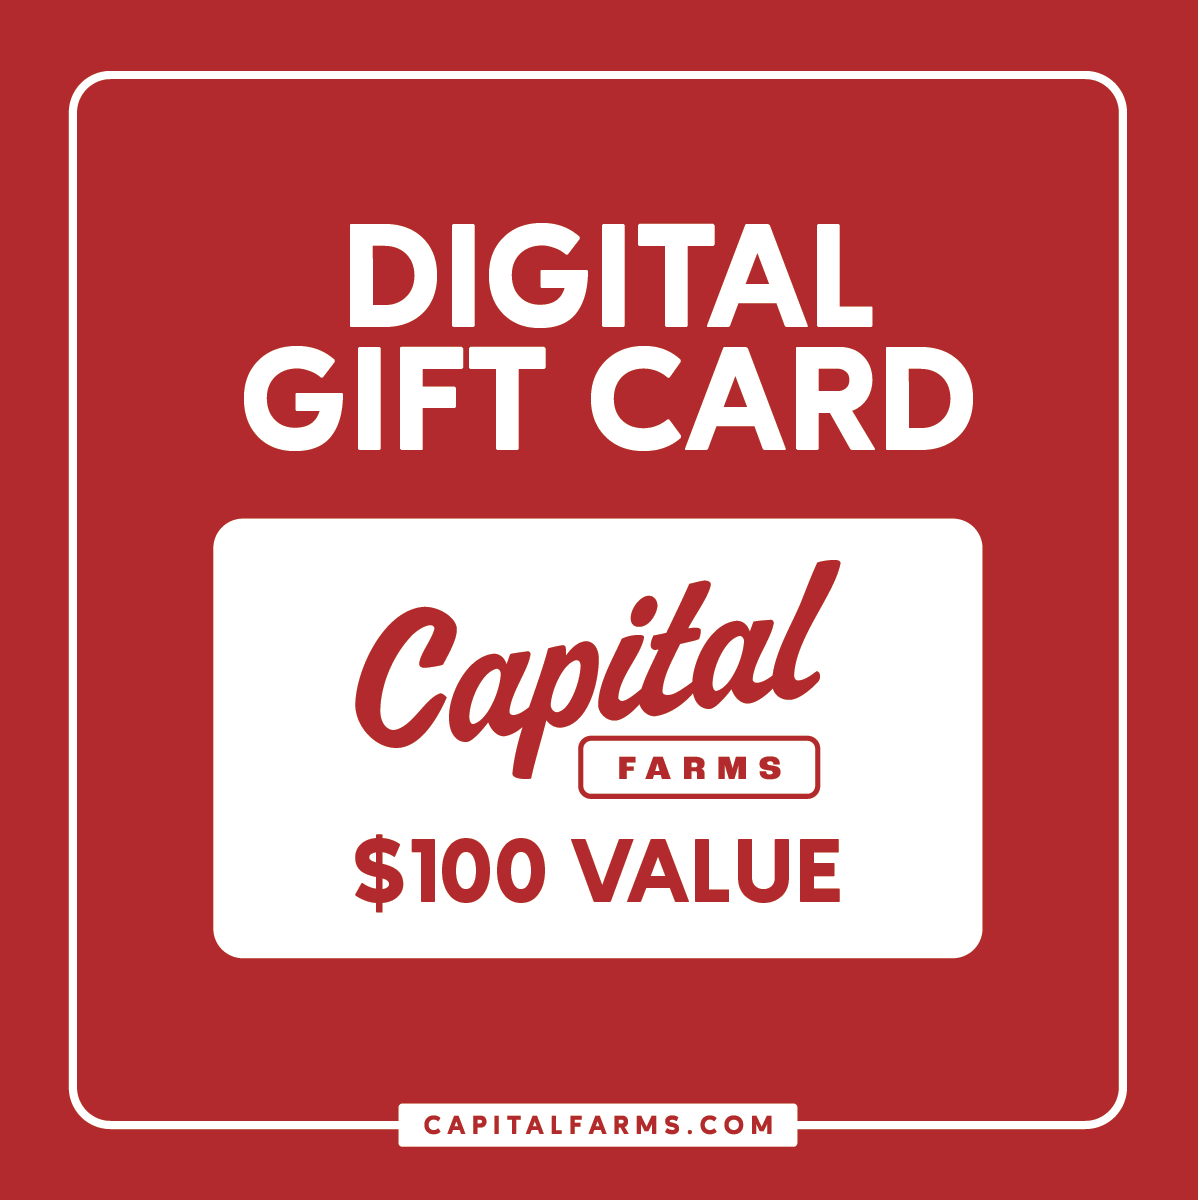 $100 - Digital Gift Card - Capital Farms Meats & Provisions